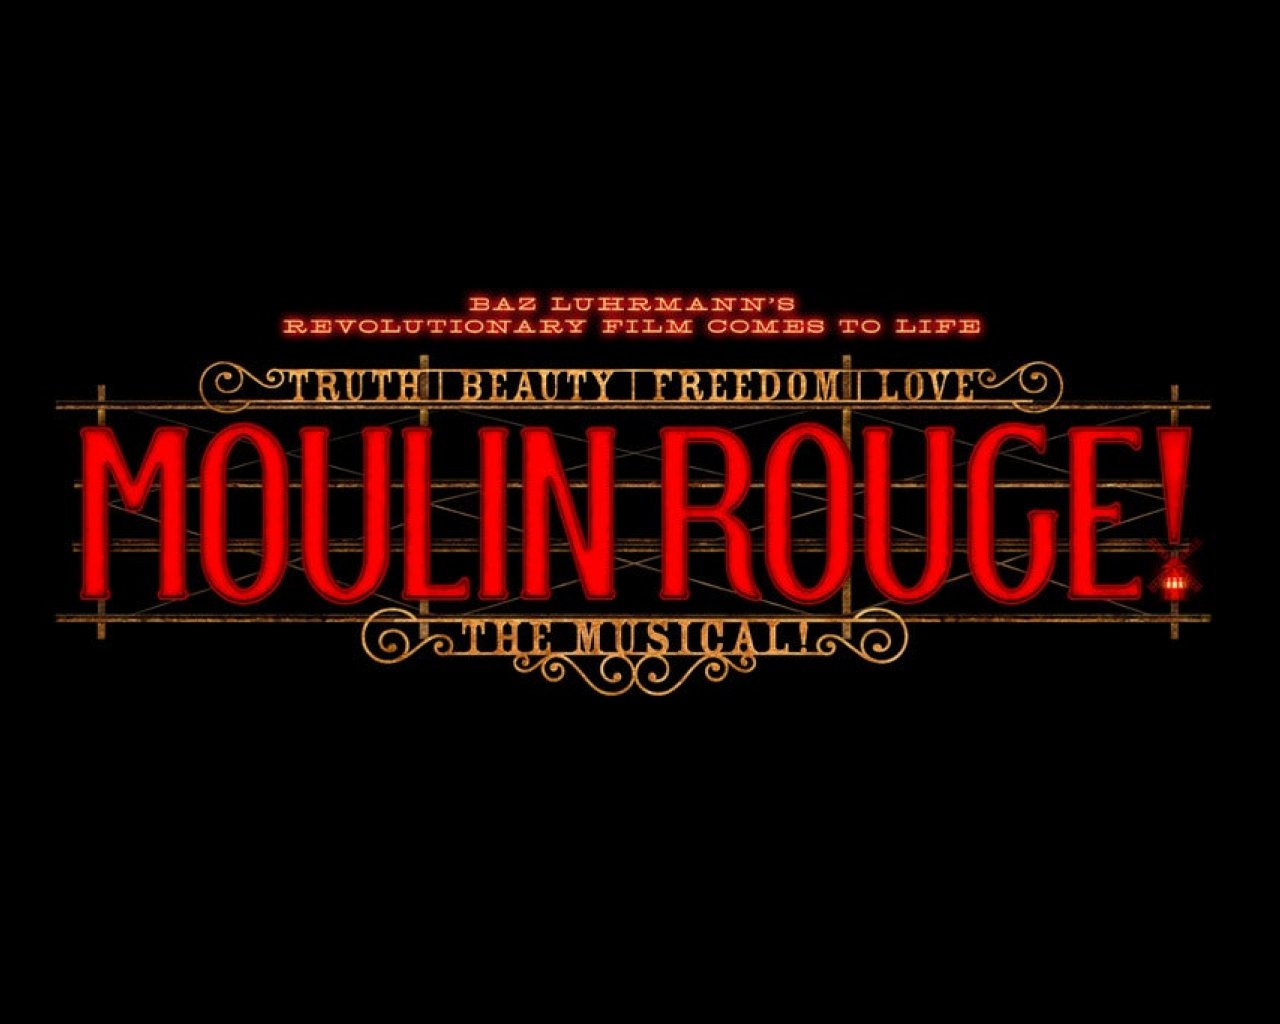 Moulin Rouge! The Musical (Australia)